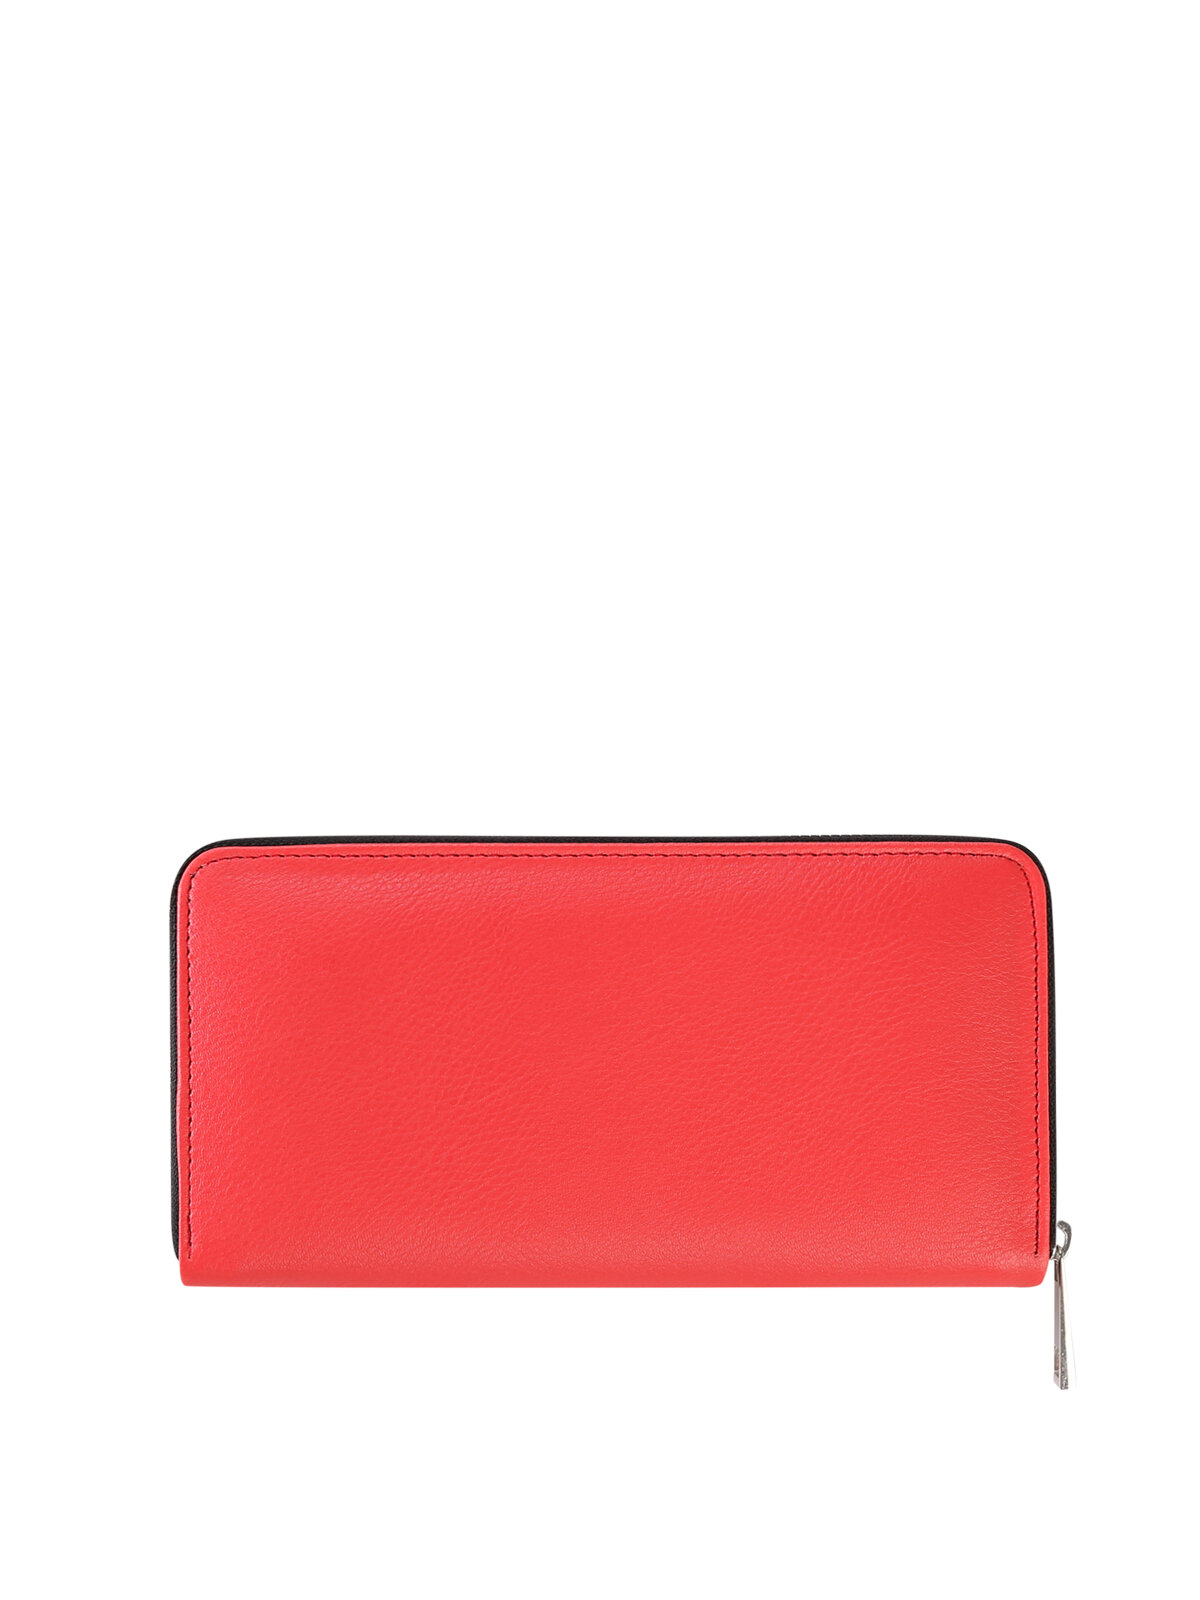 Colins Red Woman Wallet. 2